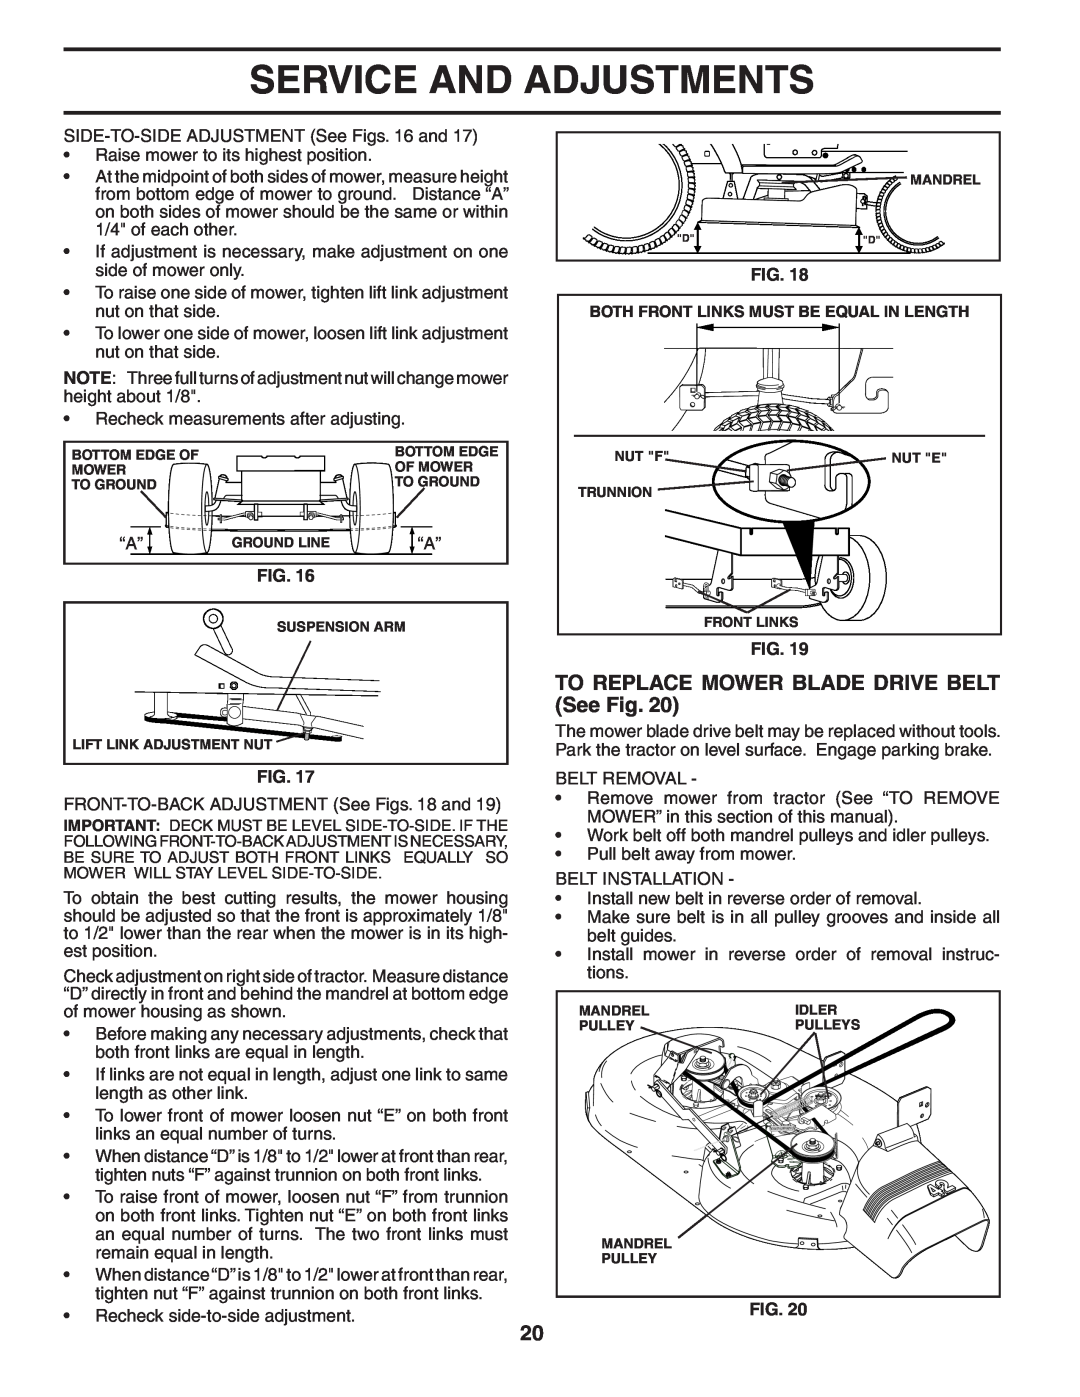 Poulan 405385 manual TO REPLACE MOWER BLADE DRIVE BELT See Fig, Service And Adjustments 